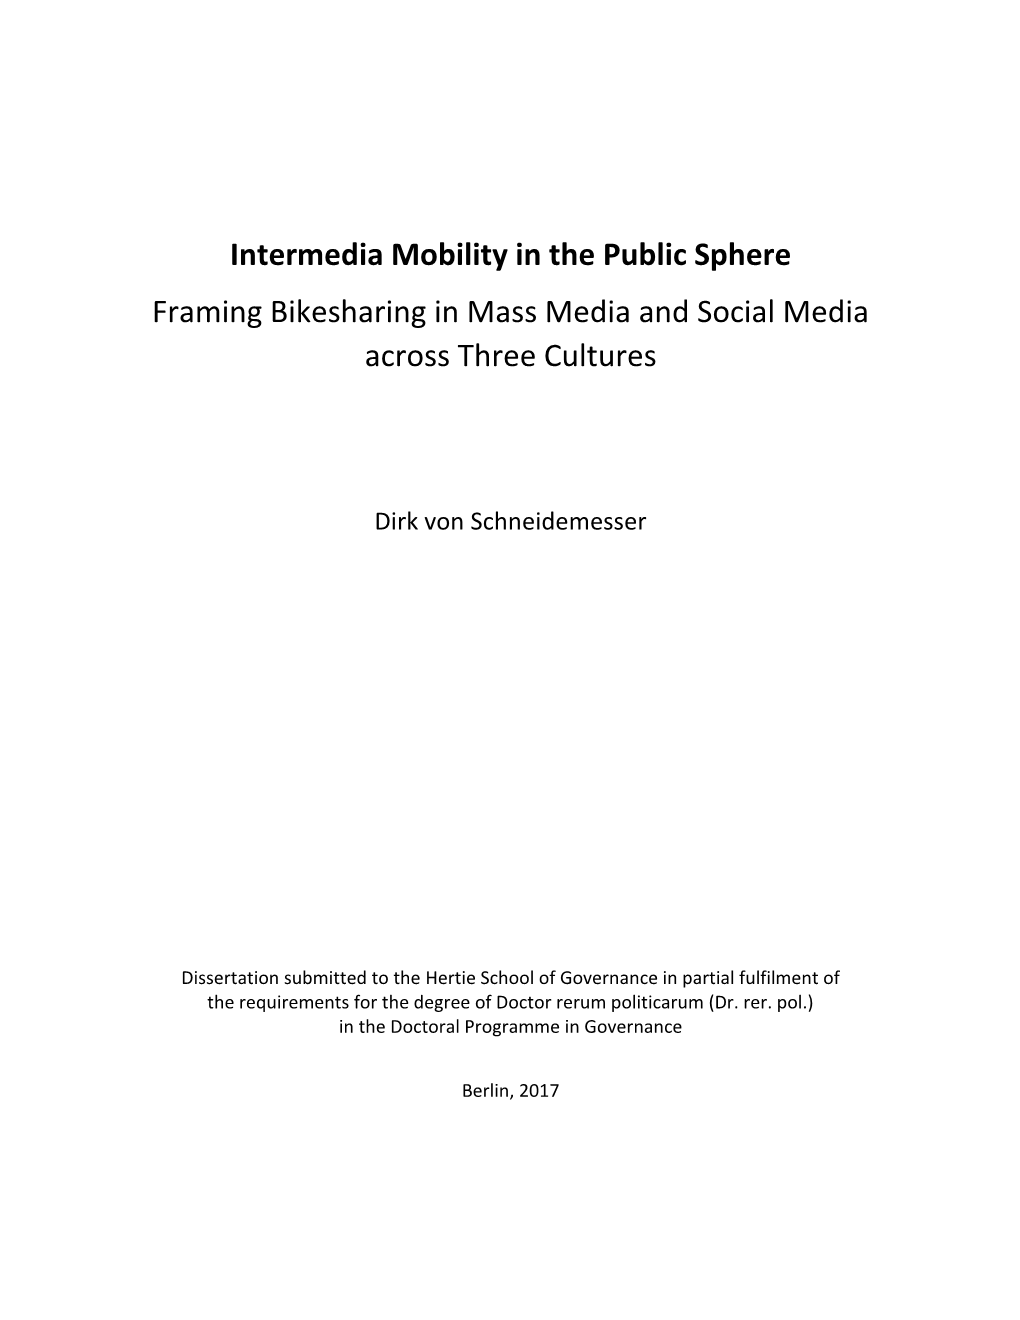 Intermedia Mobility in the Public Sphere Framing Bikesharing in Mass Media and Social Media Across Three Cultures